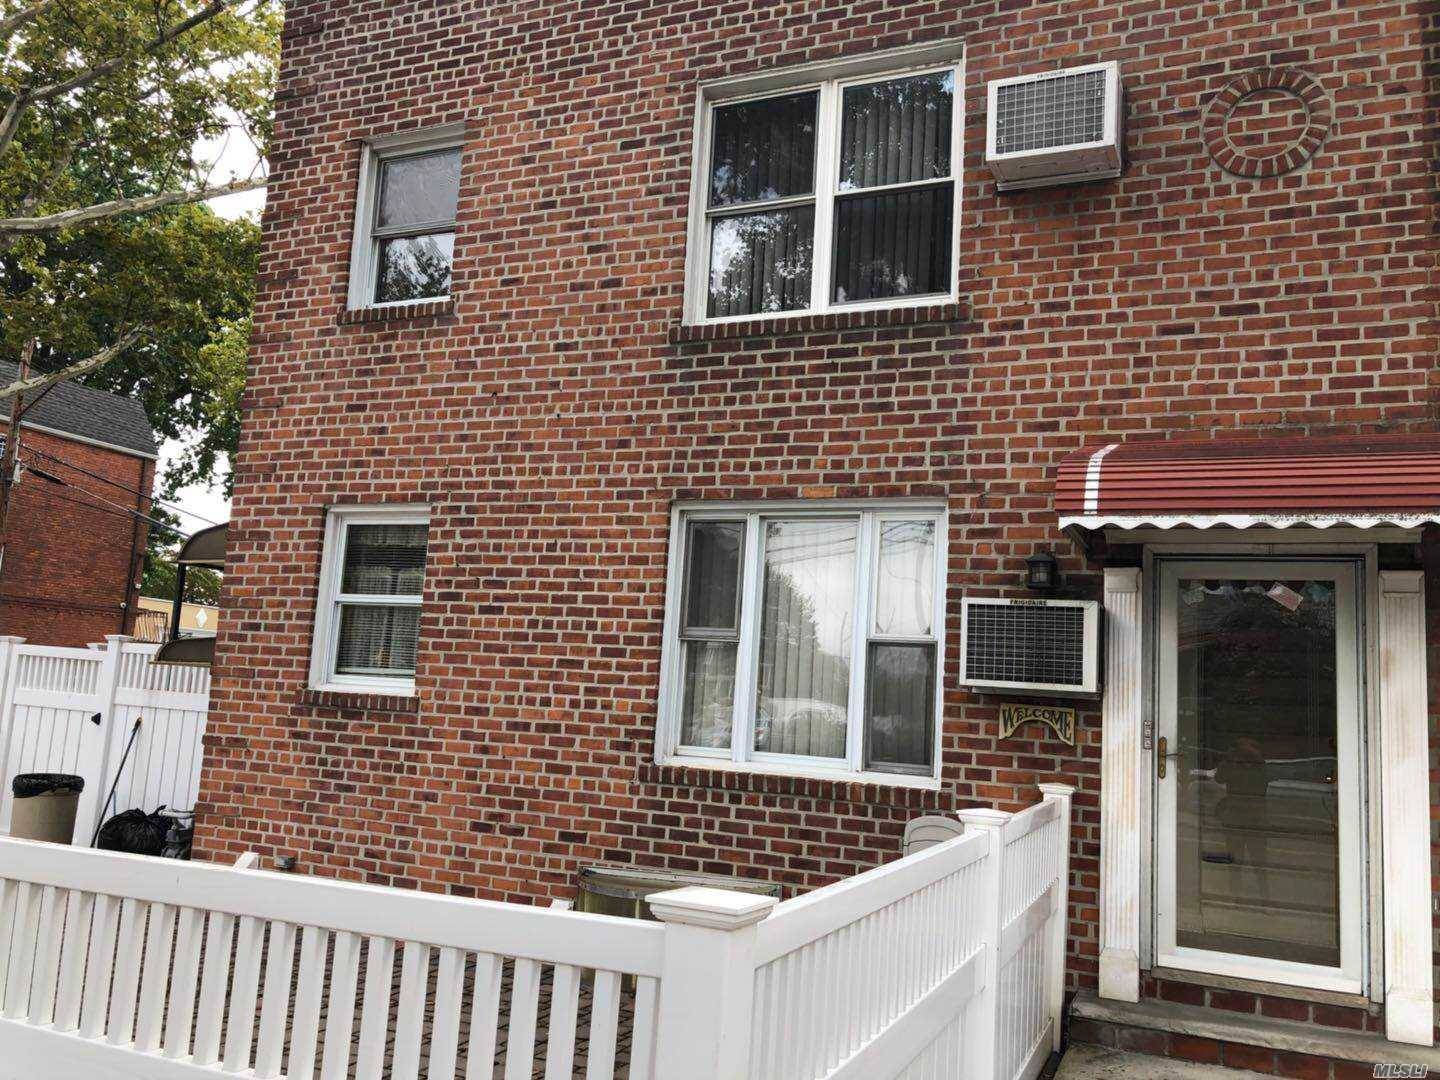 2 BR House Flushing LIC / Queens